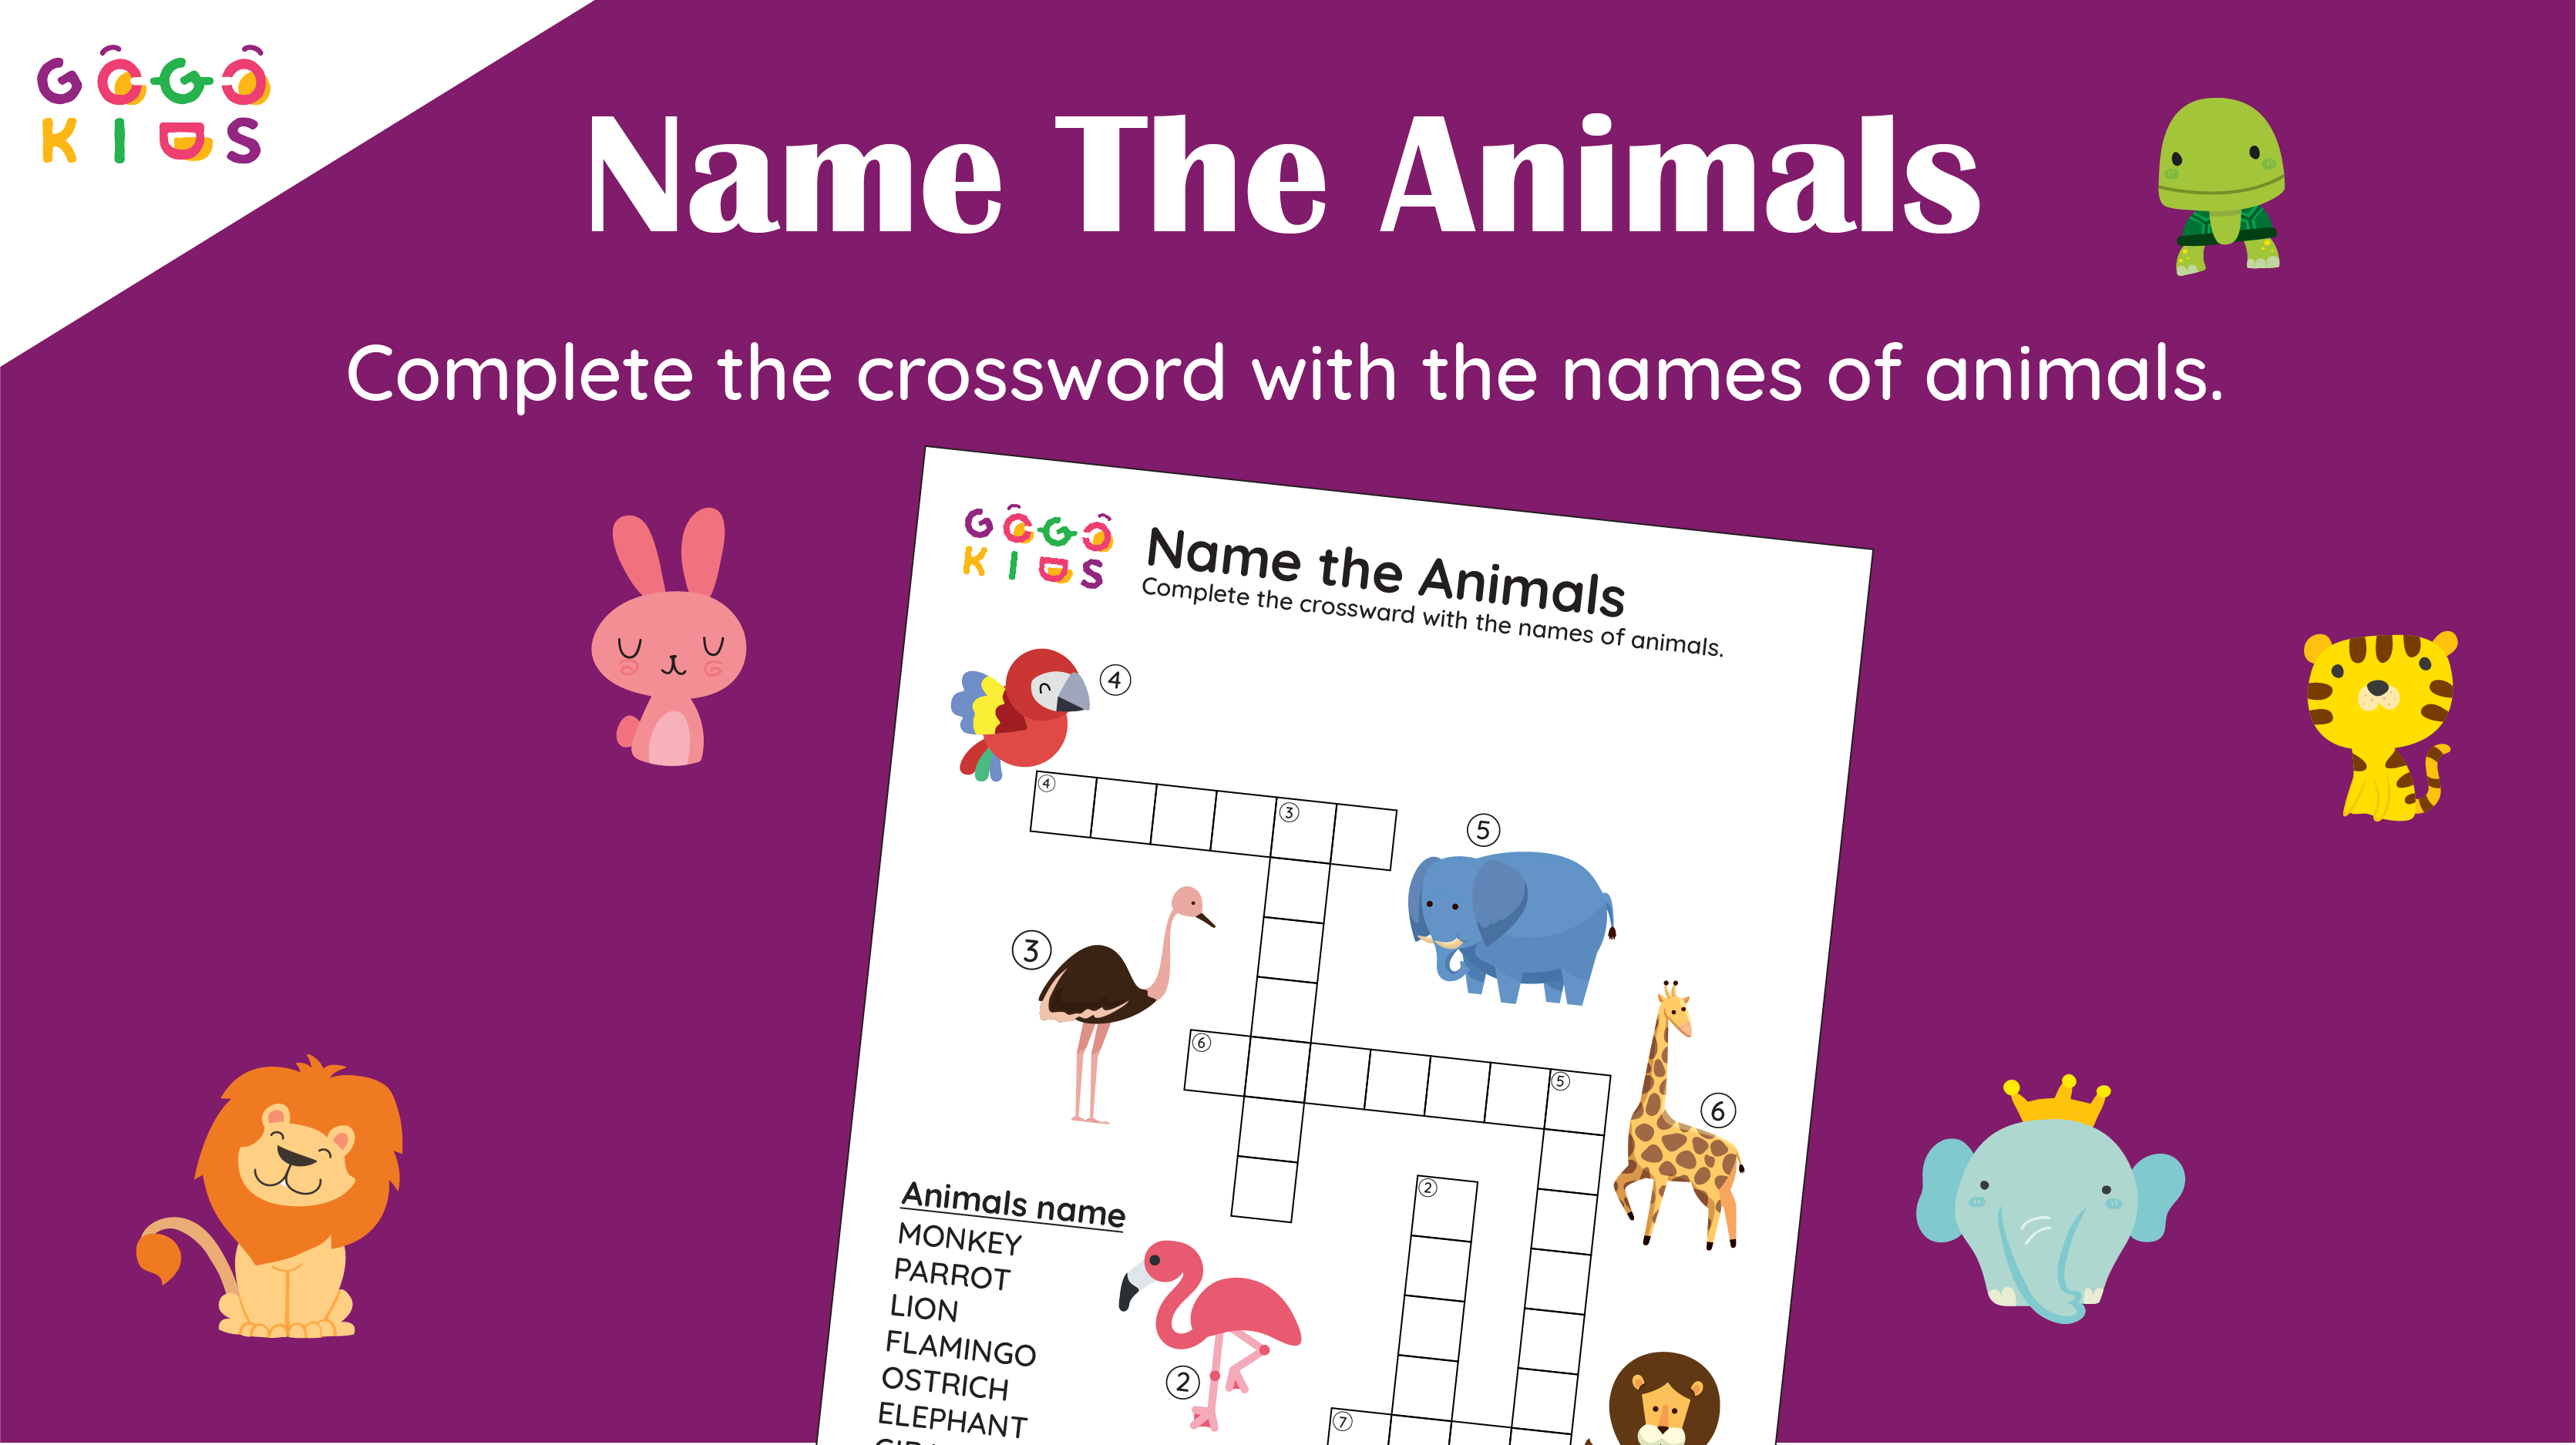 Words and Numbers: Name The Animals